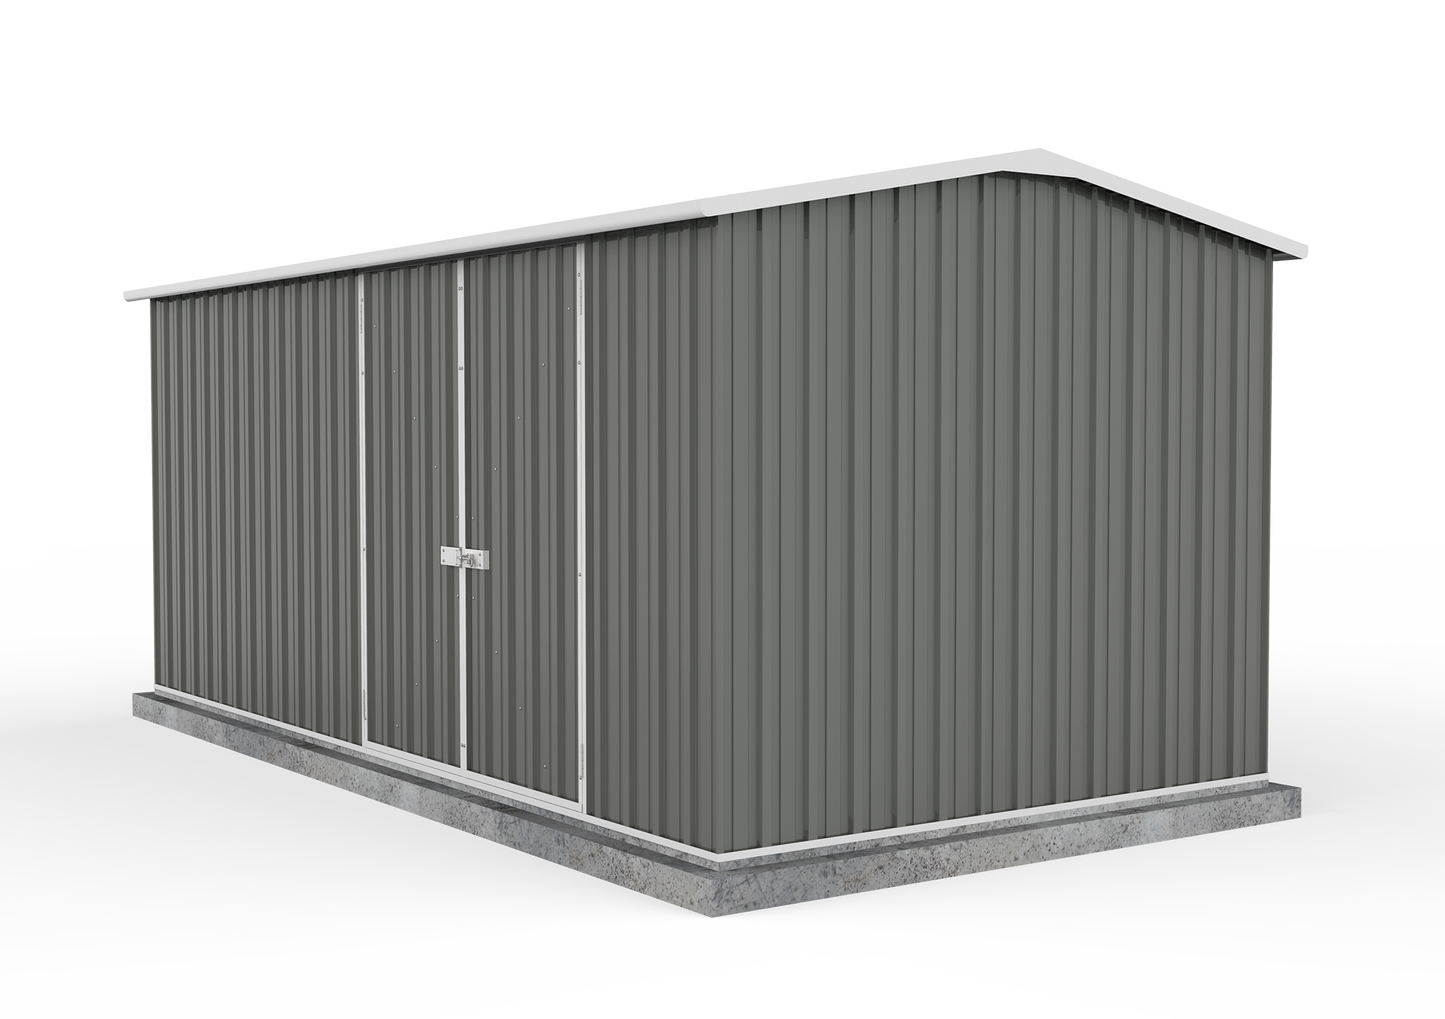 Absco 4.48mW x 3.00mD x 2.06mH Double Door Workshop Shed - Woodland Grey